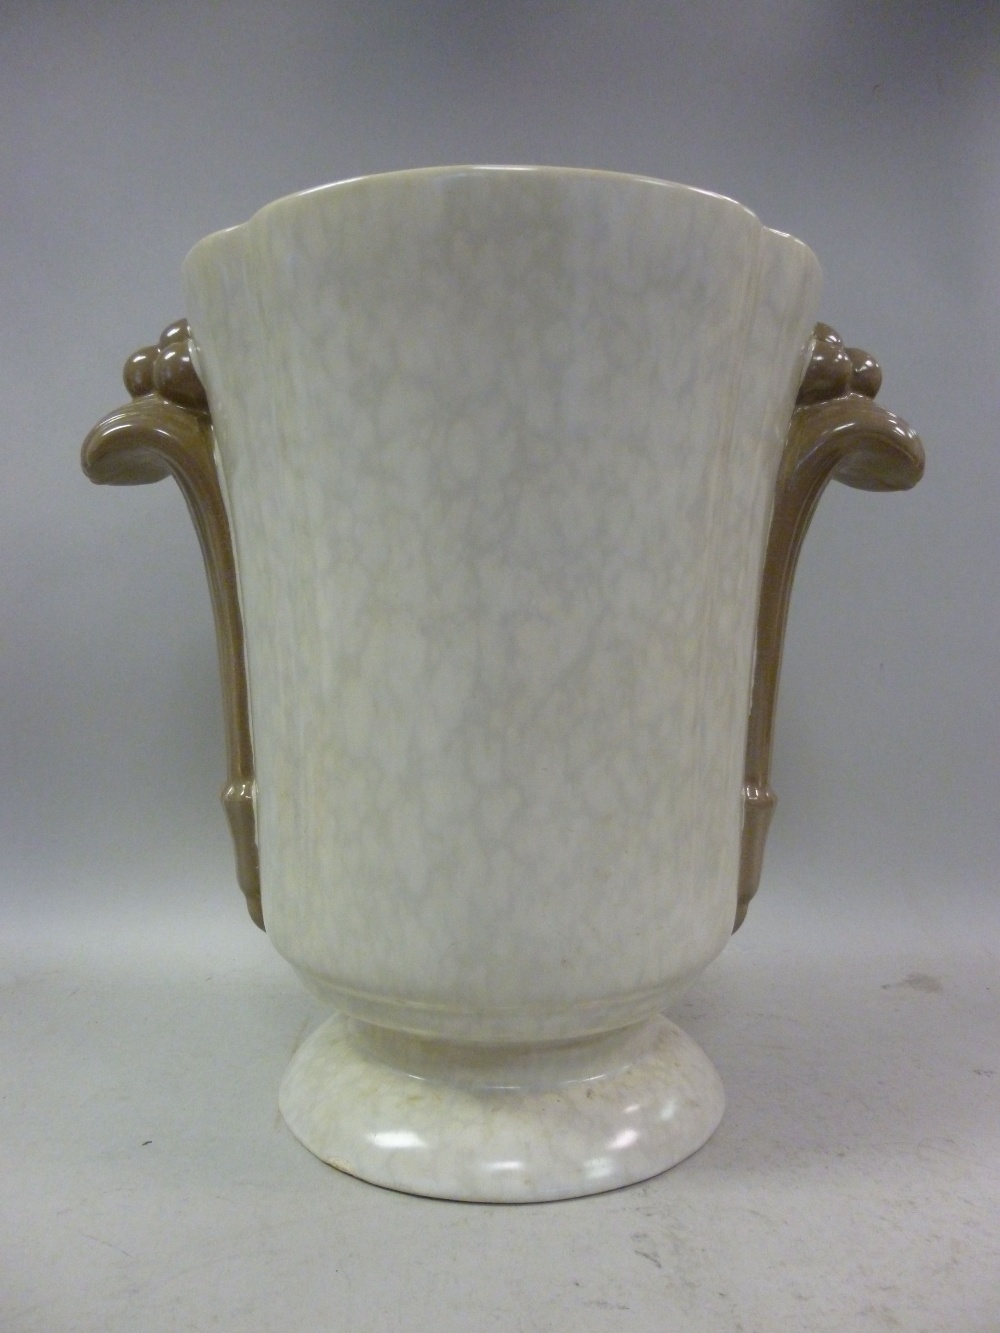 A 1930s Poole pottery Art Deco sponged and solid two tone brown glazed vase with opposing, moulded